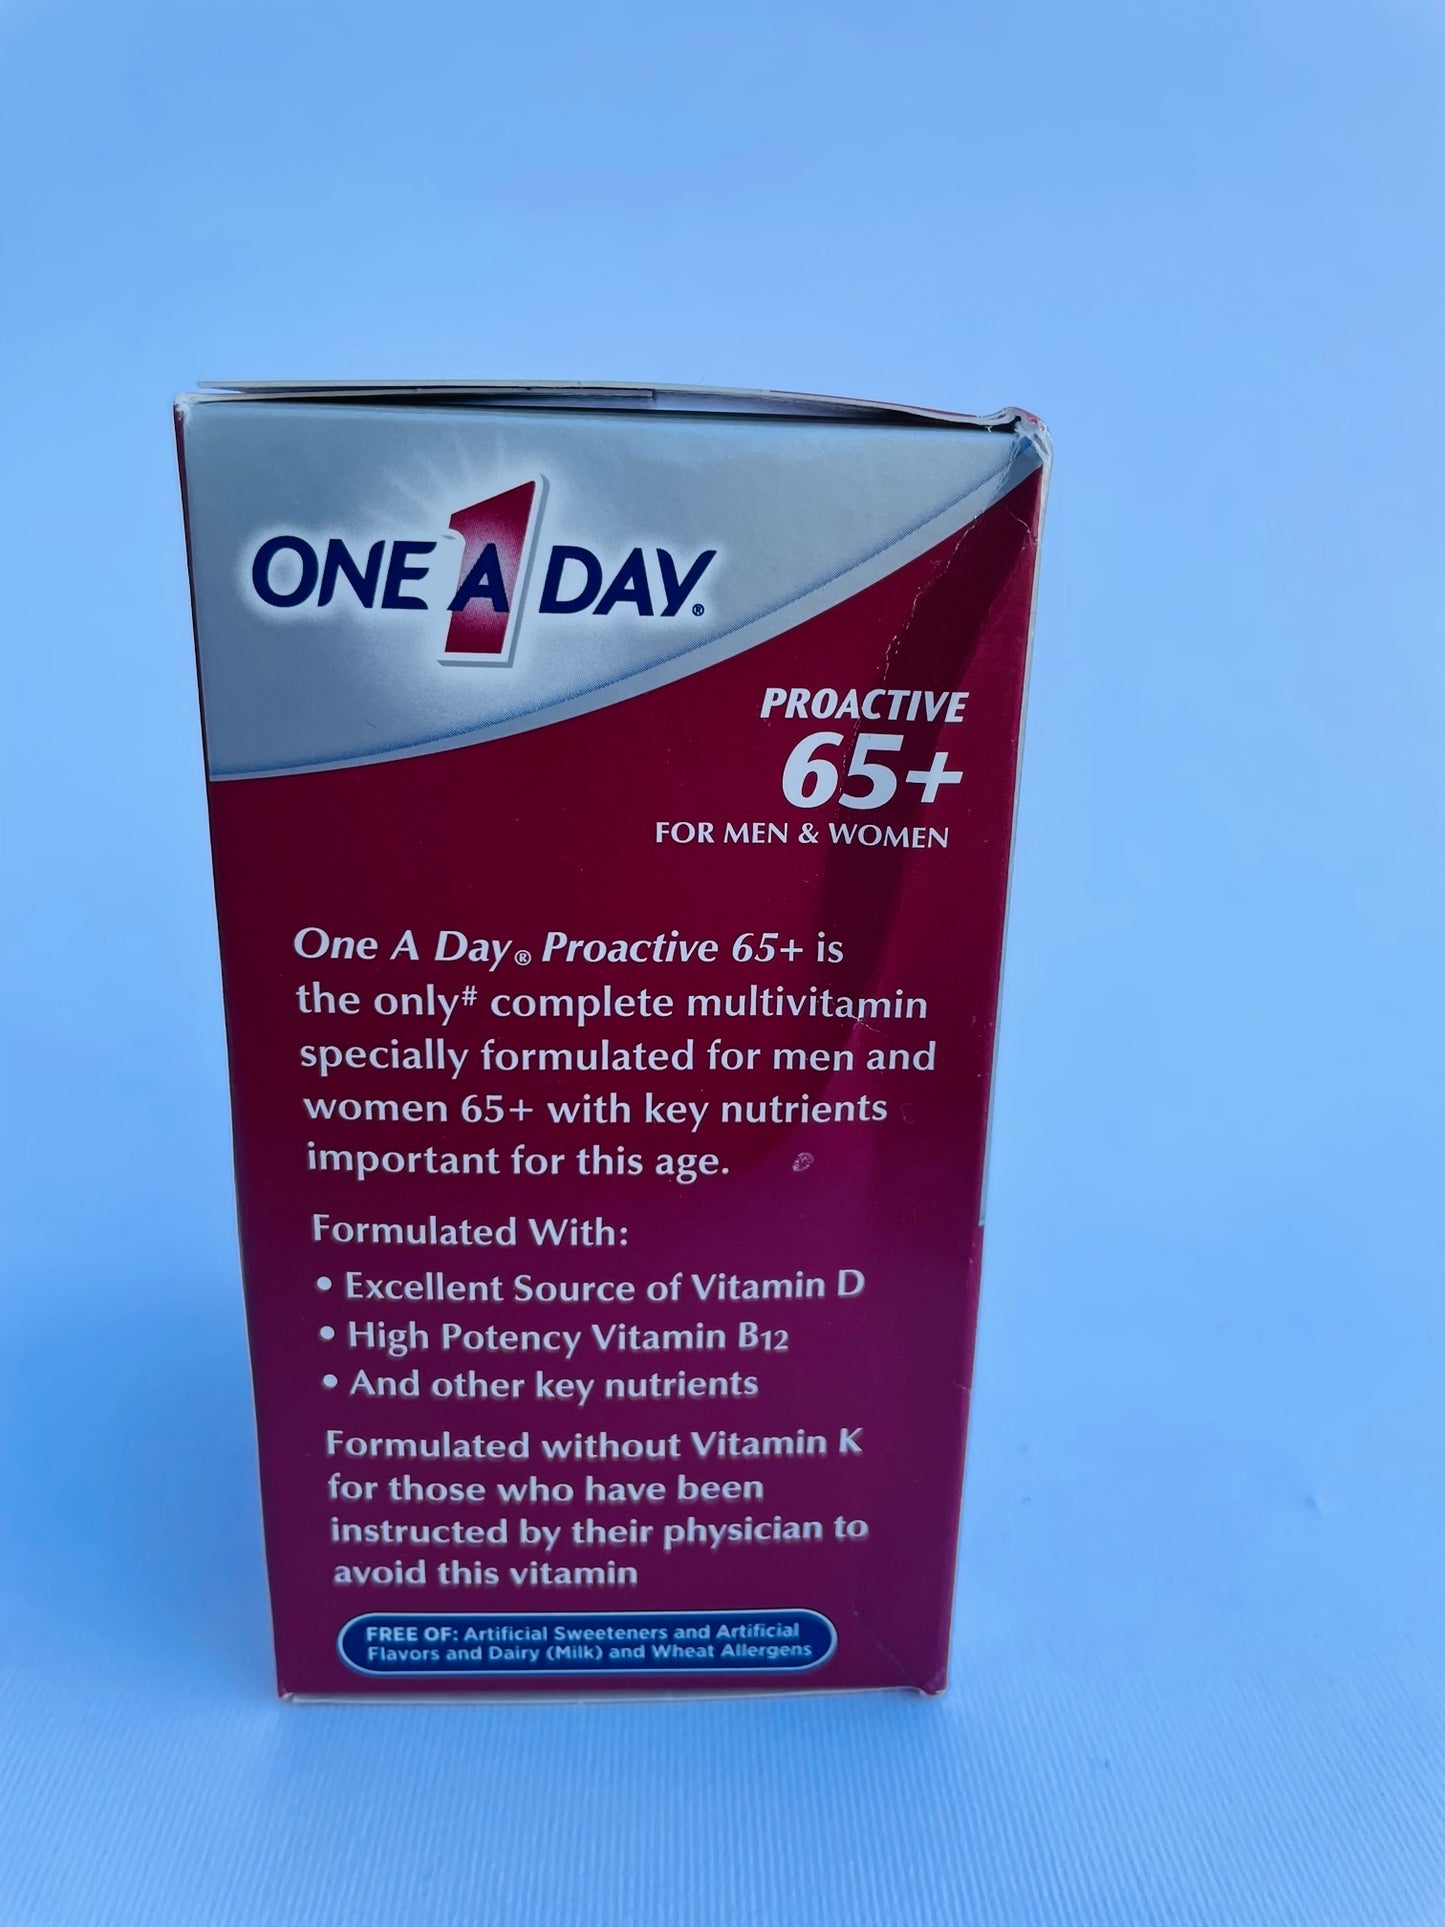 One aday multivitamin tablets for +65 age